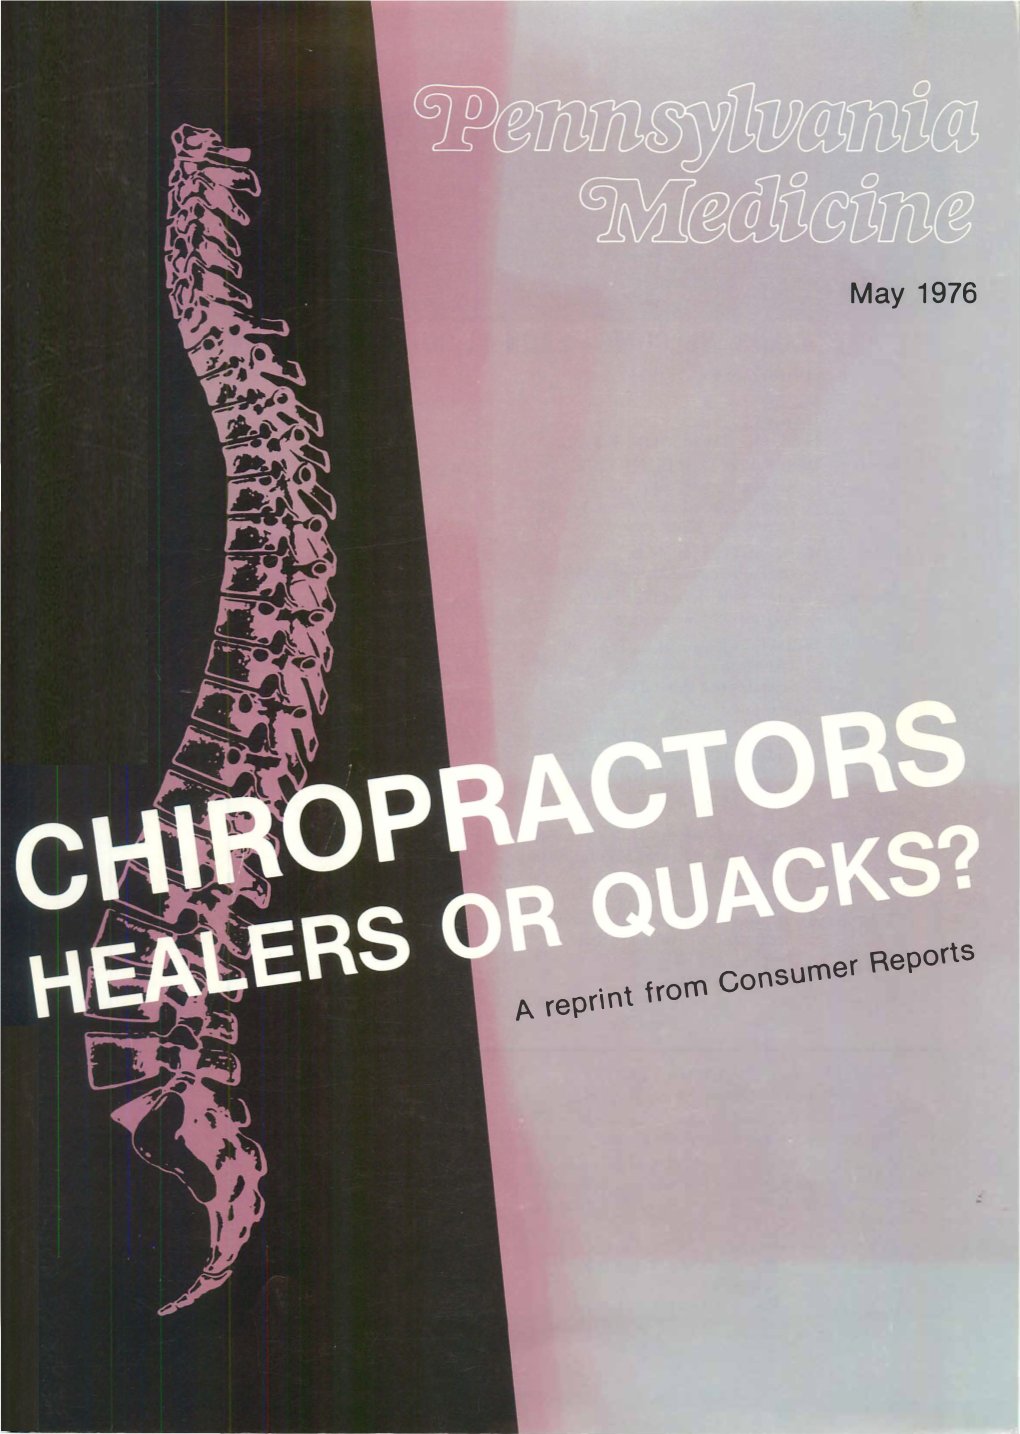 Healers Or Quacks? Part1: the 80-Year War with Science Part2: How Chiropractors Can Help-Or Harm